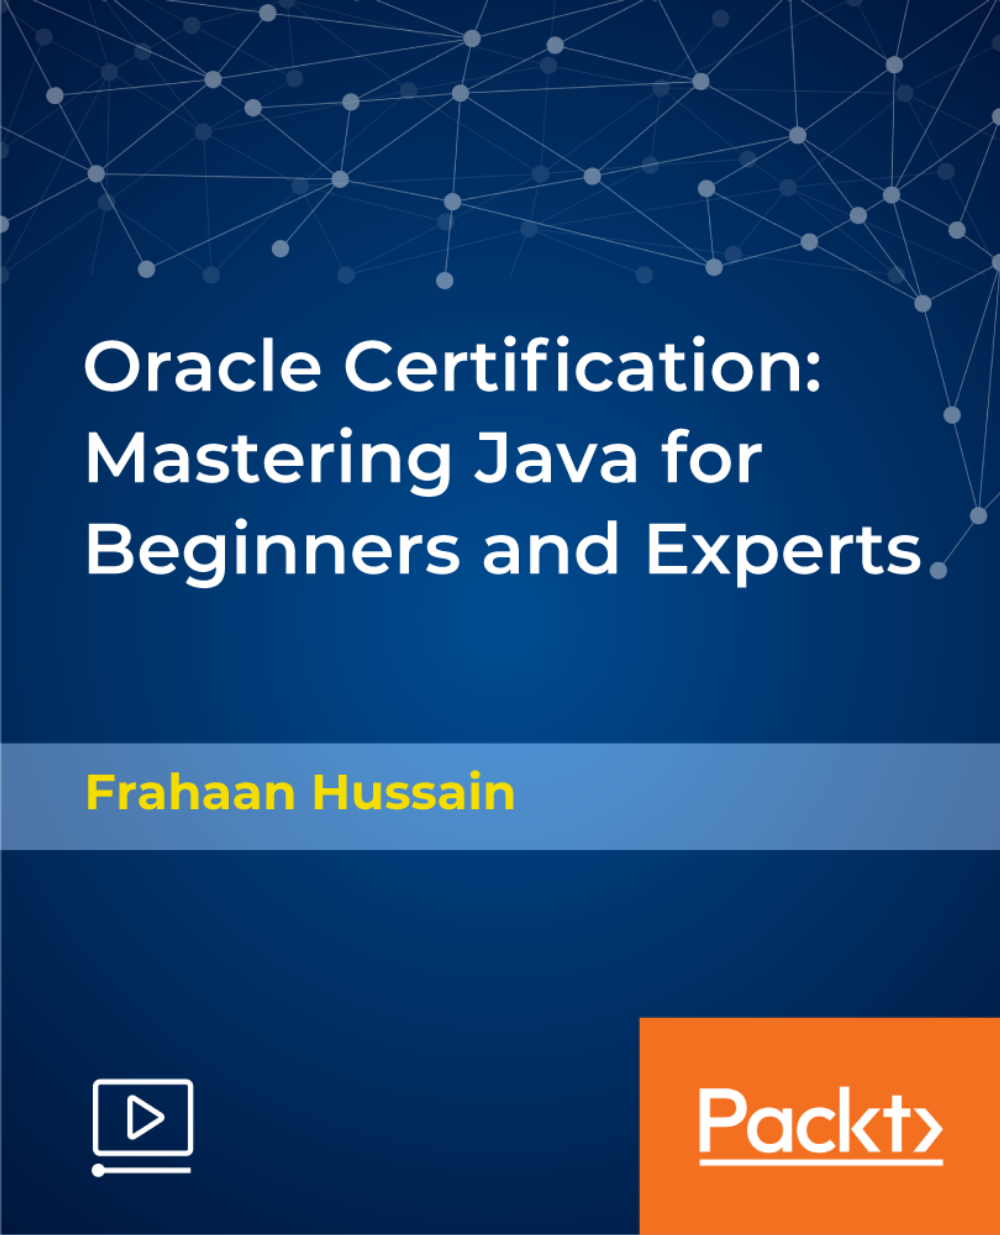 Oracle Certification: Mastering Java for Beginners and Experts